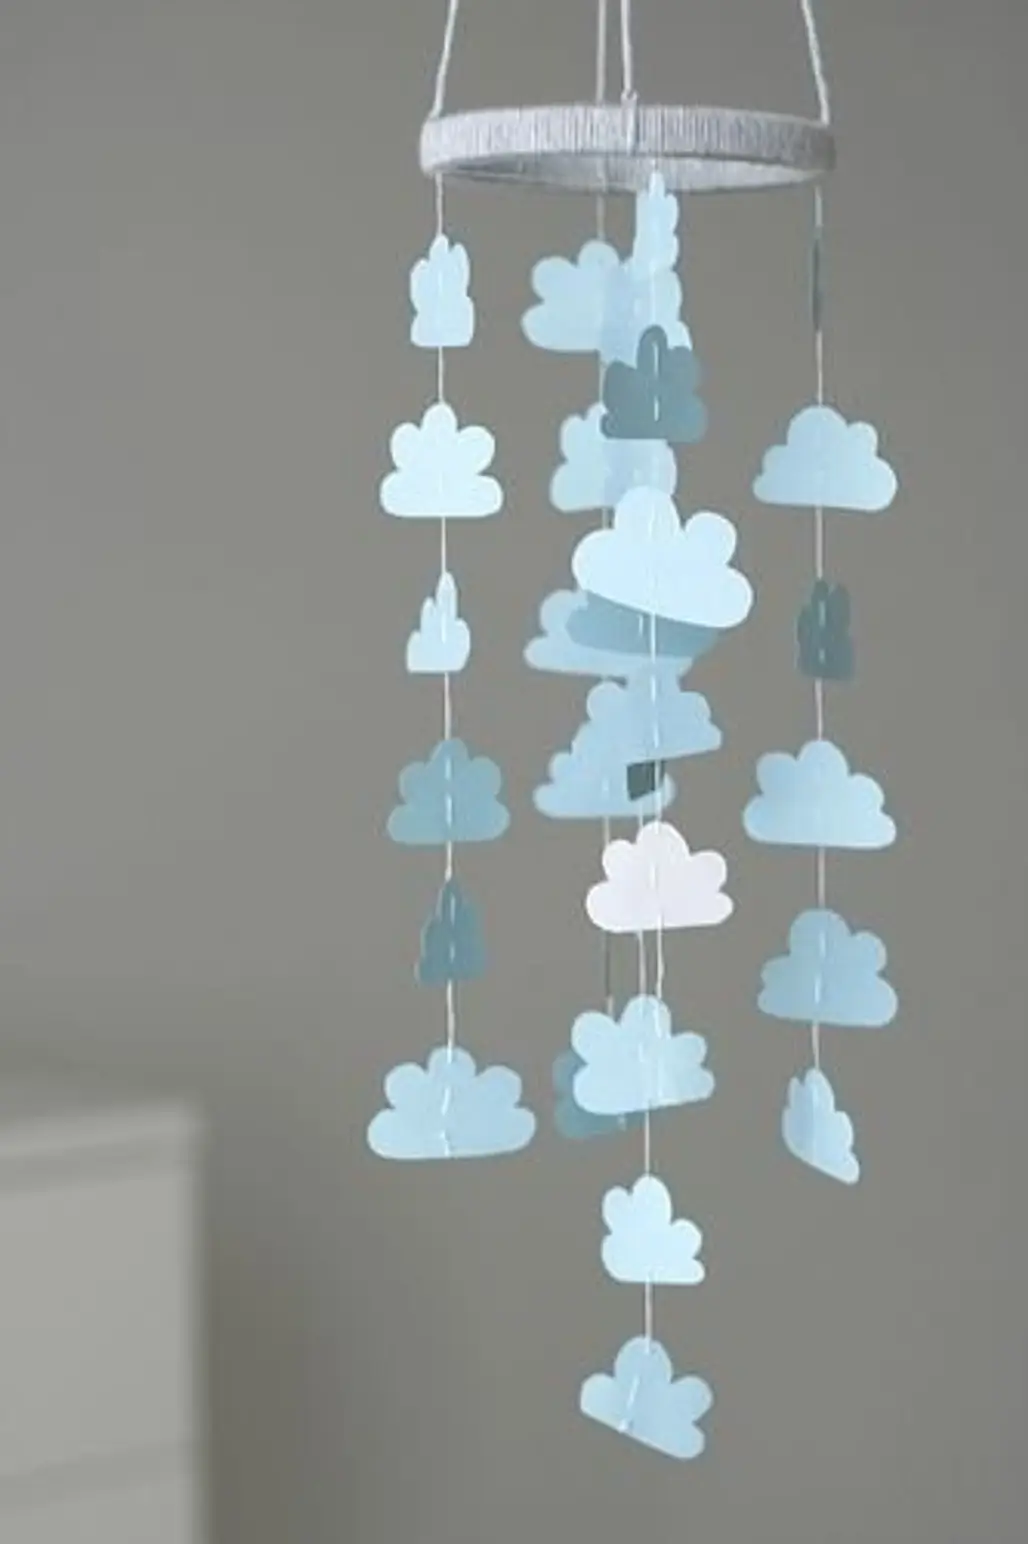 37 DIY Cloud Projects for Rainy Days ...